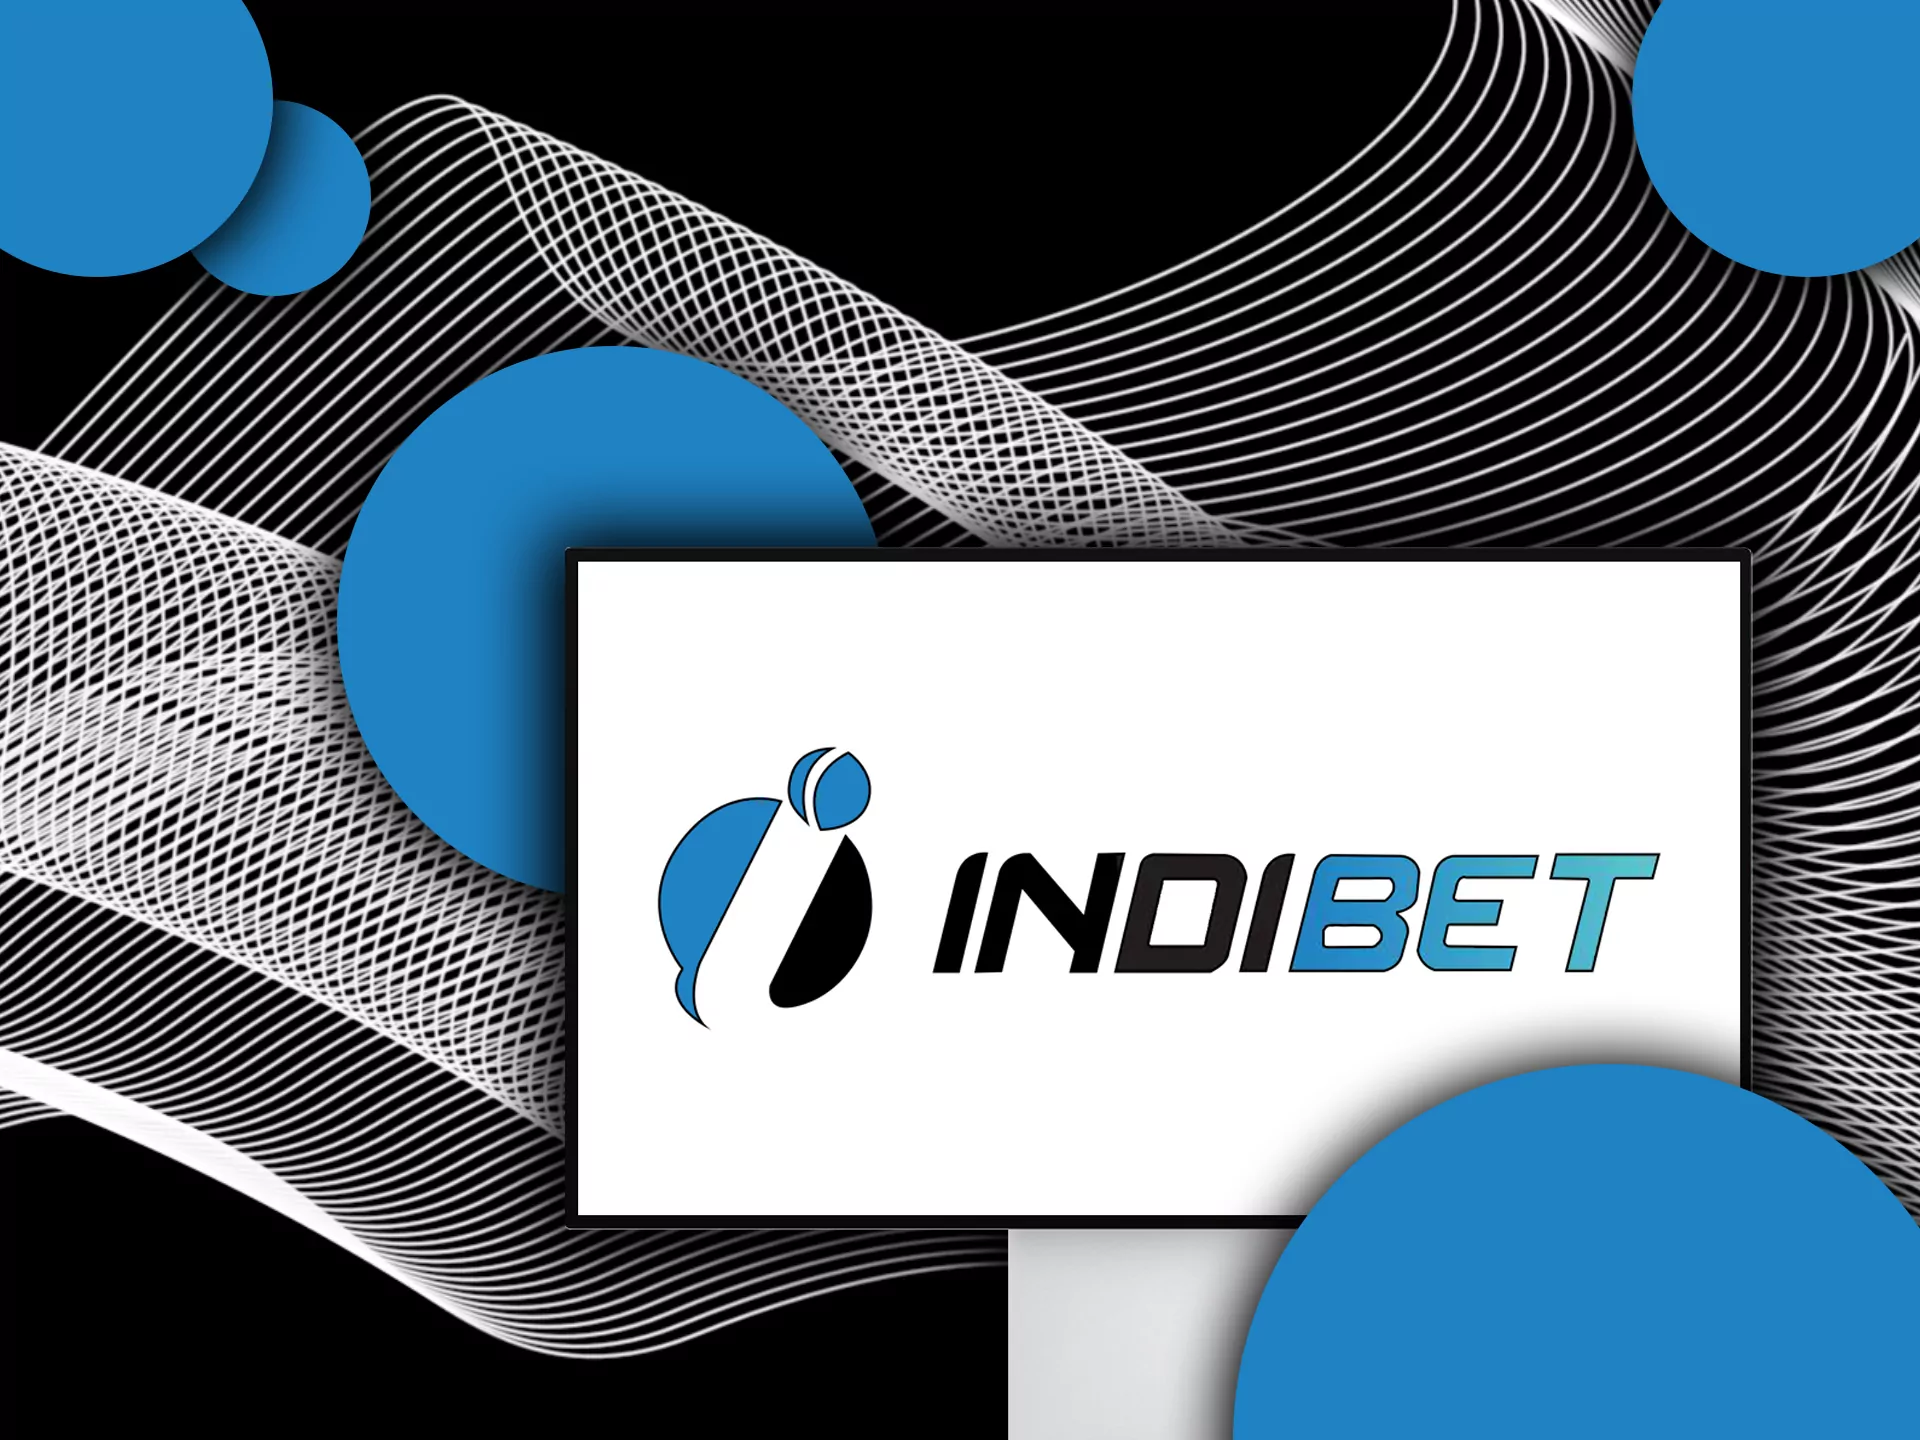 The history of Indibet is rather short, but the bookie is developing rapidly.